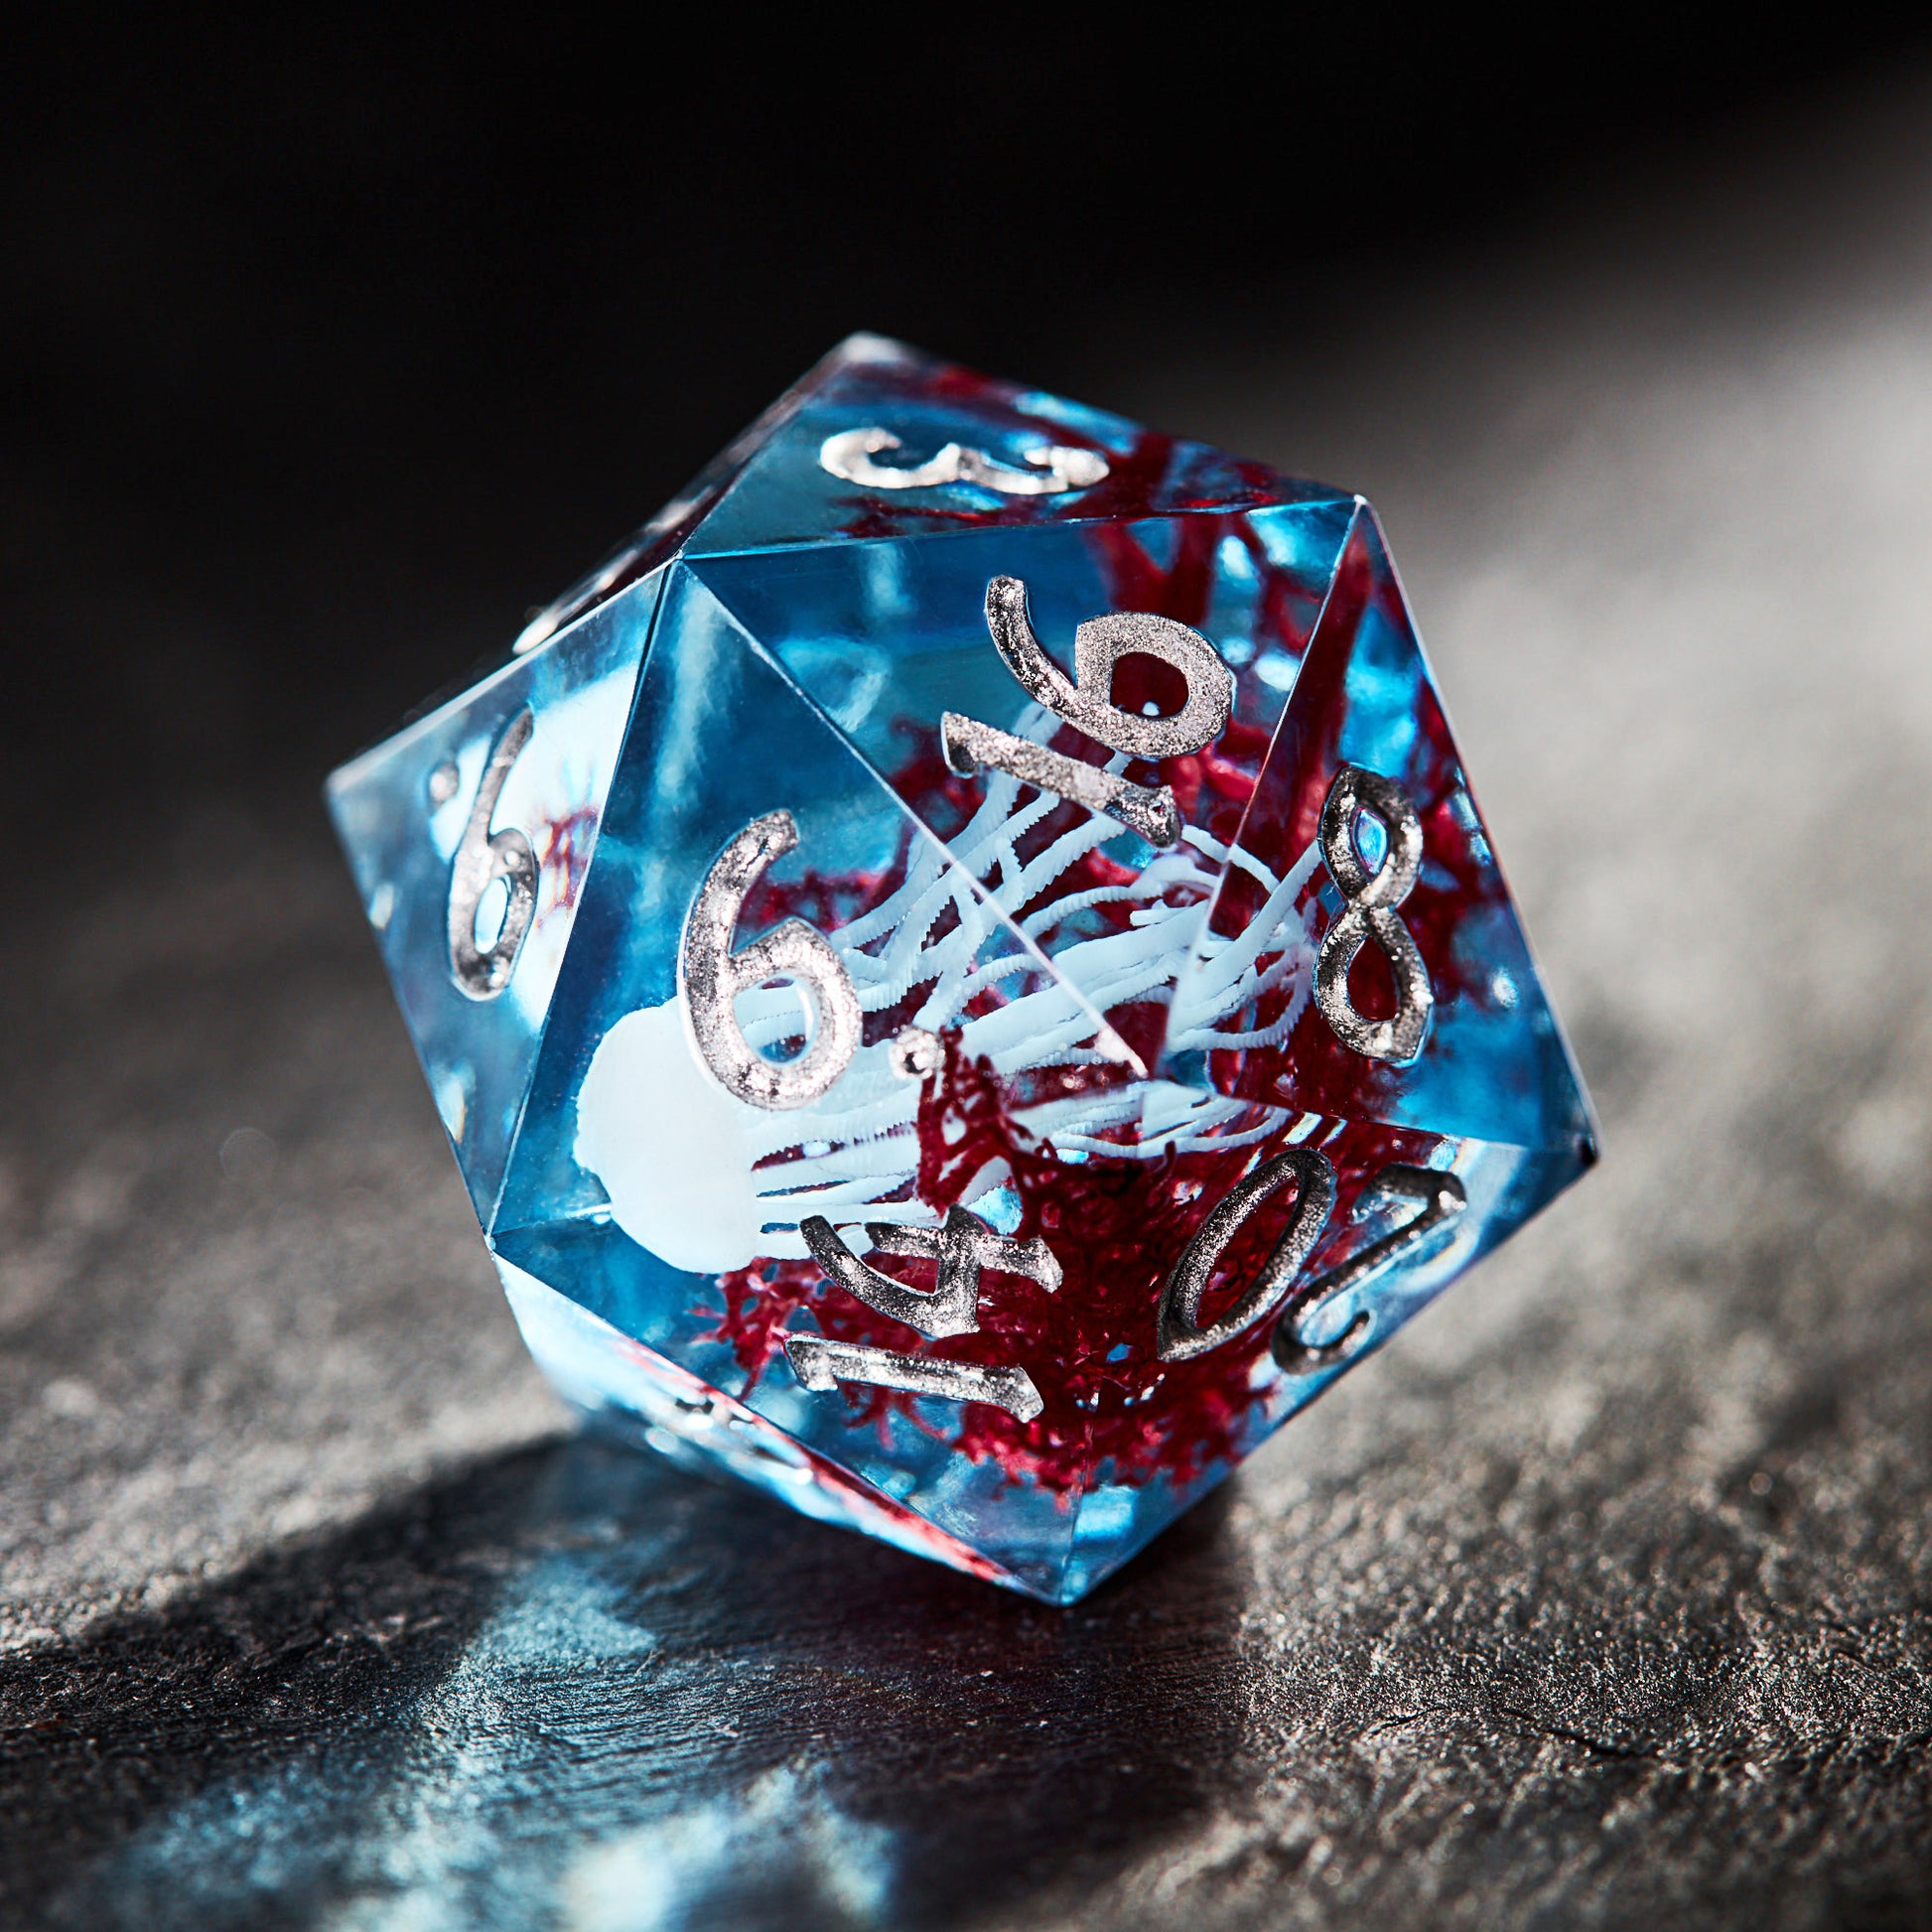 Coral and Jellyfish DnD D&D Dice Set - CrystalMaggie